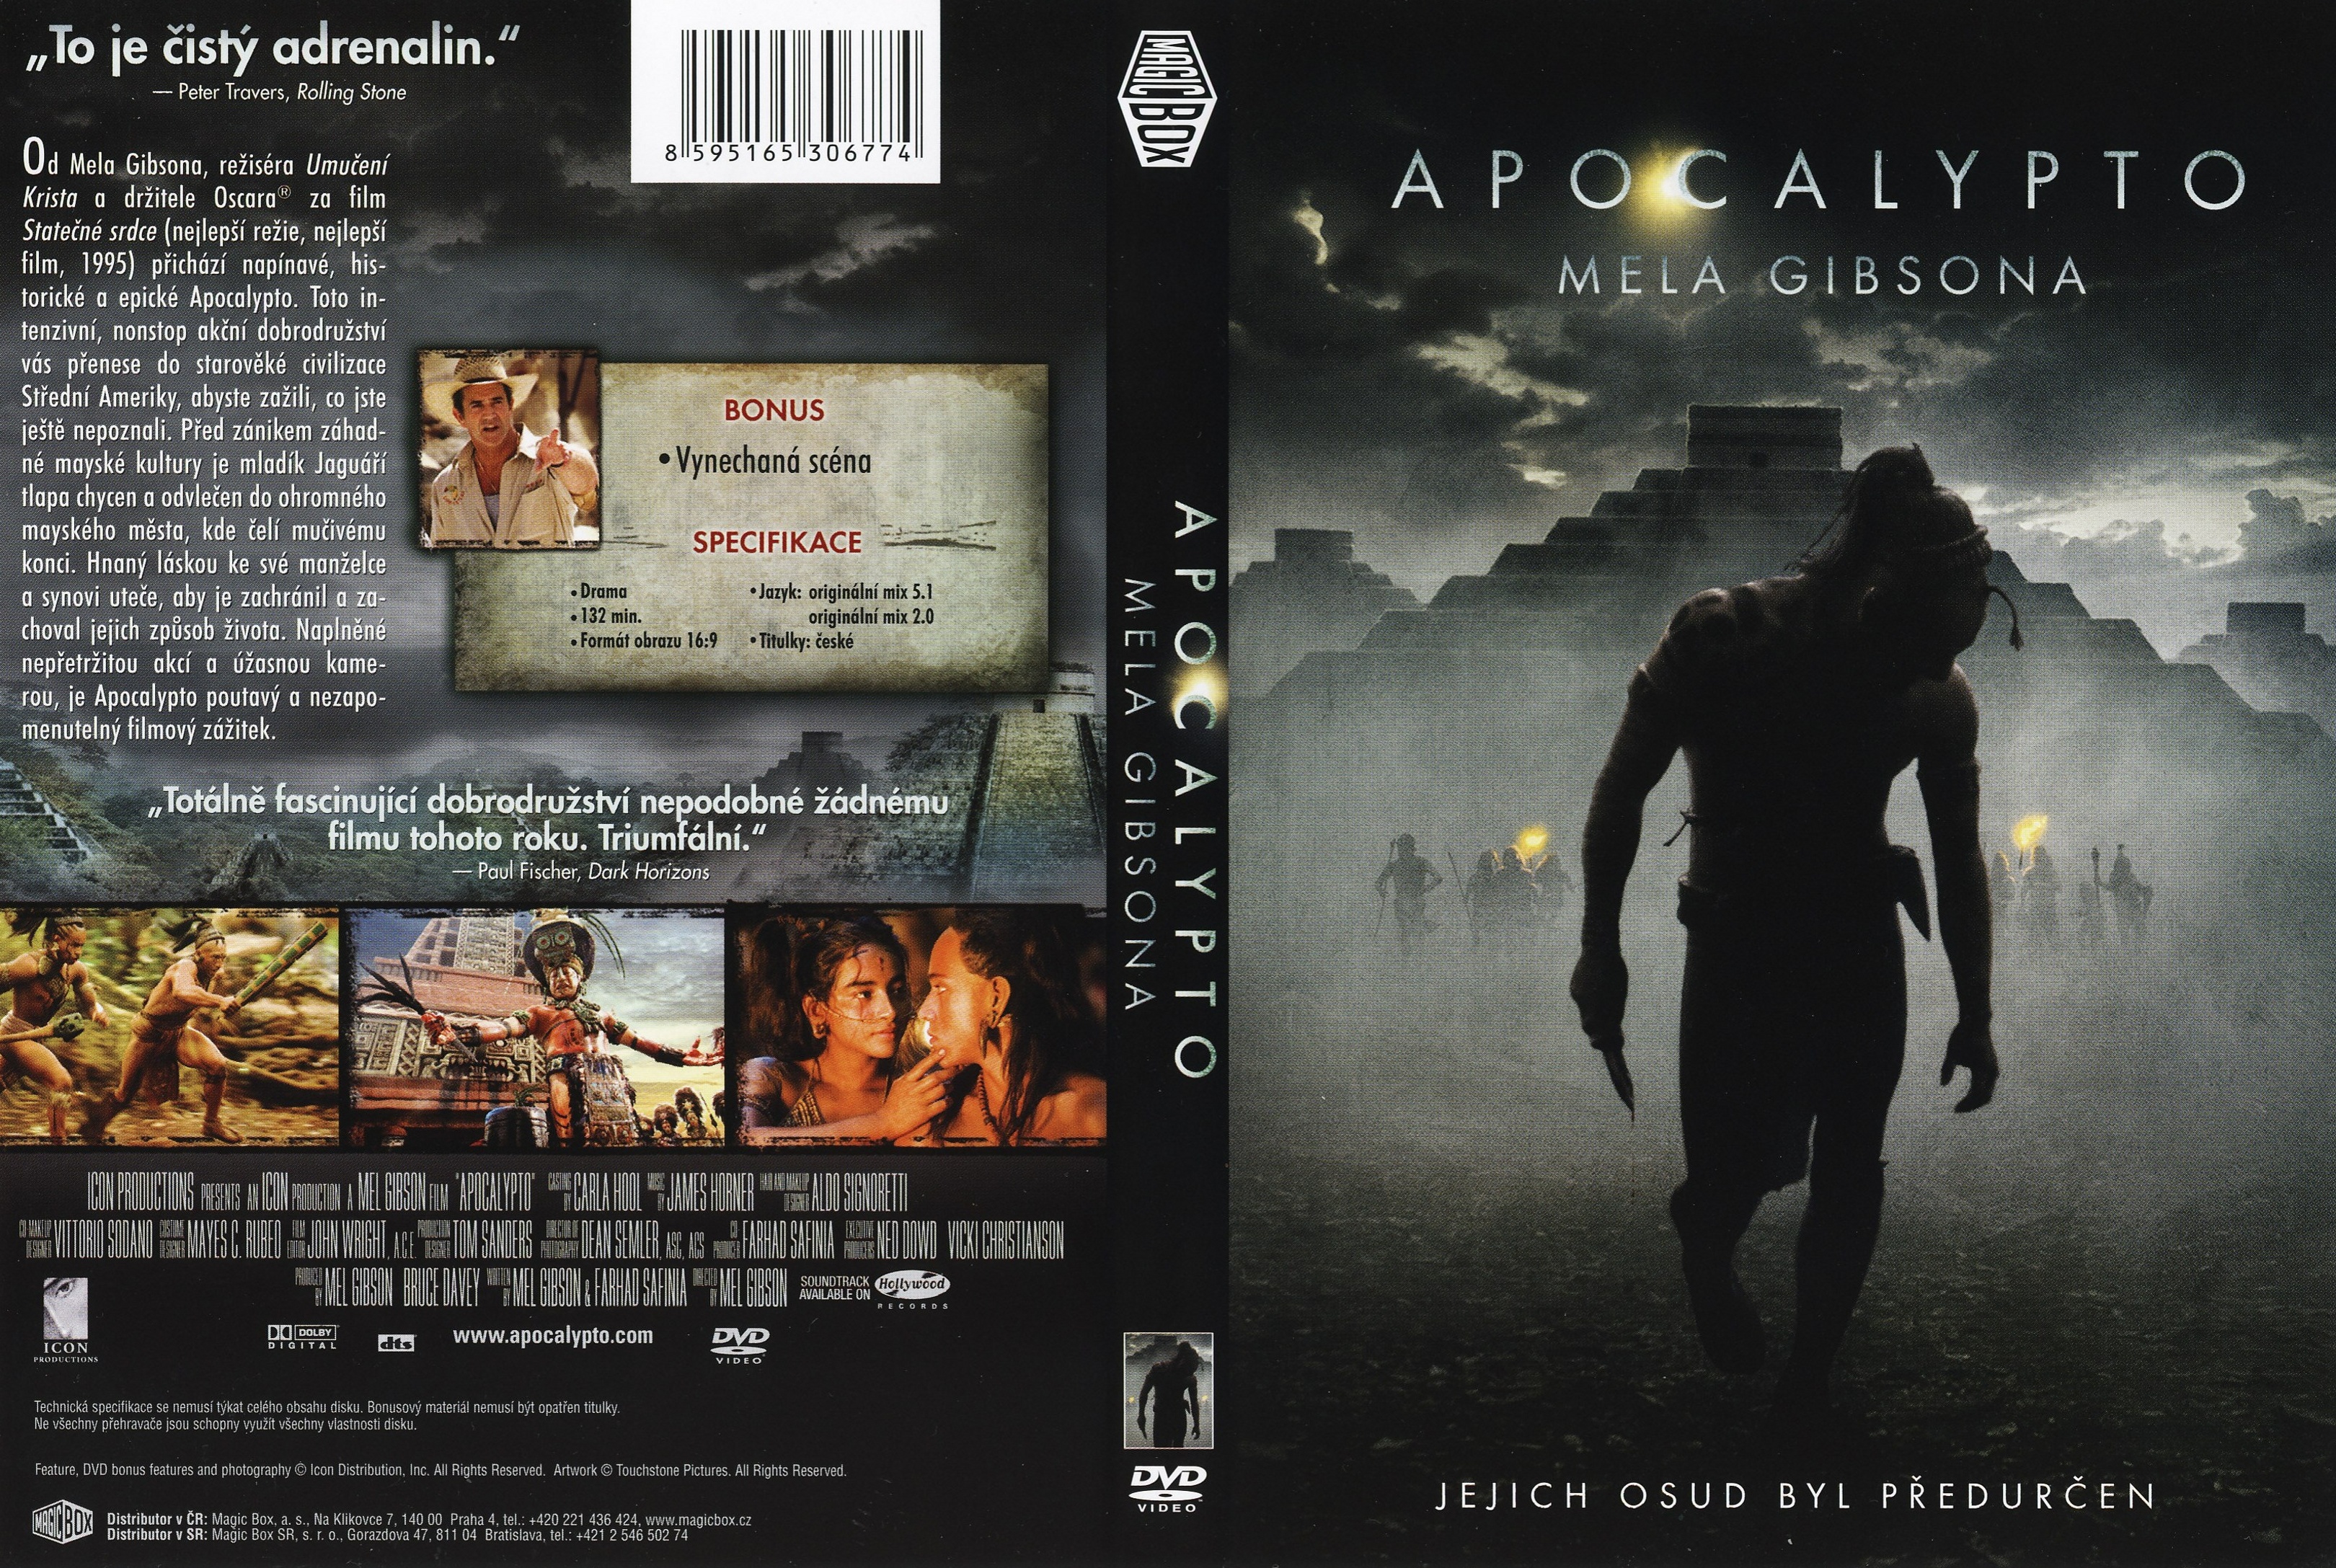 andy detra recommends apocalypto download full movie pic